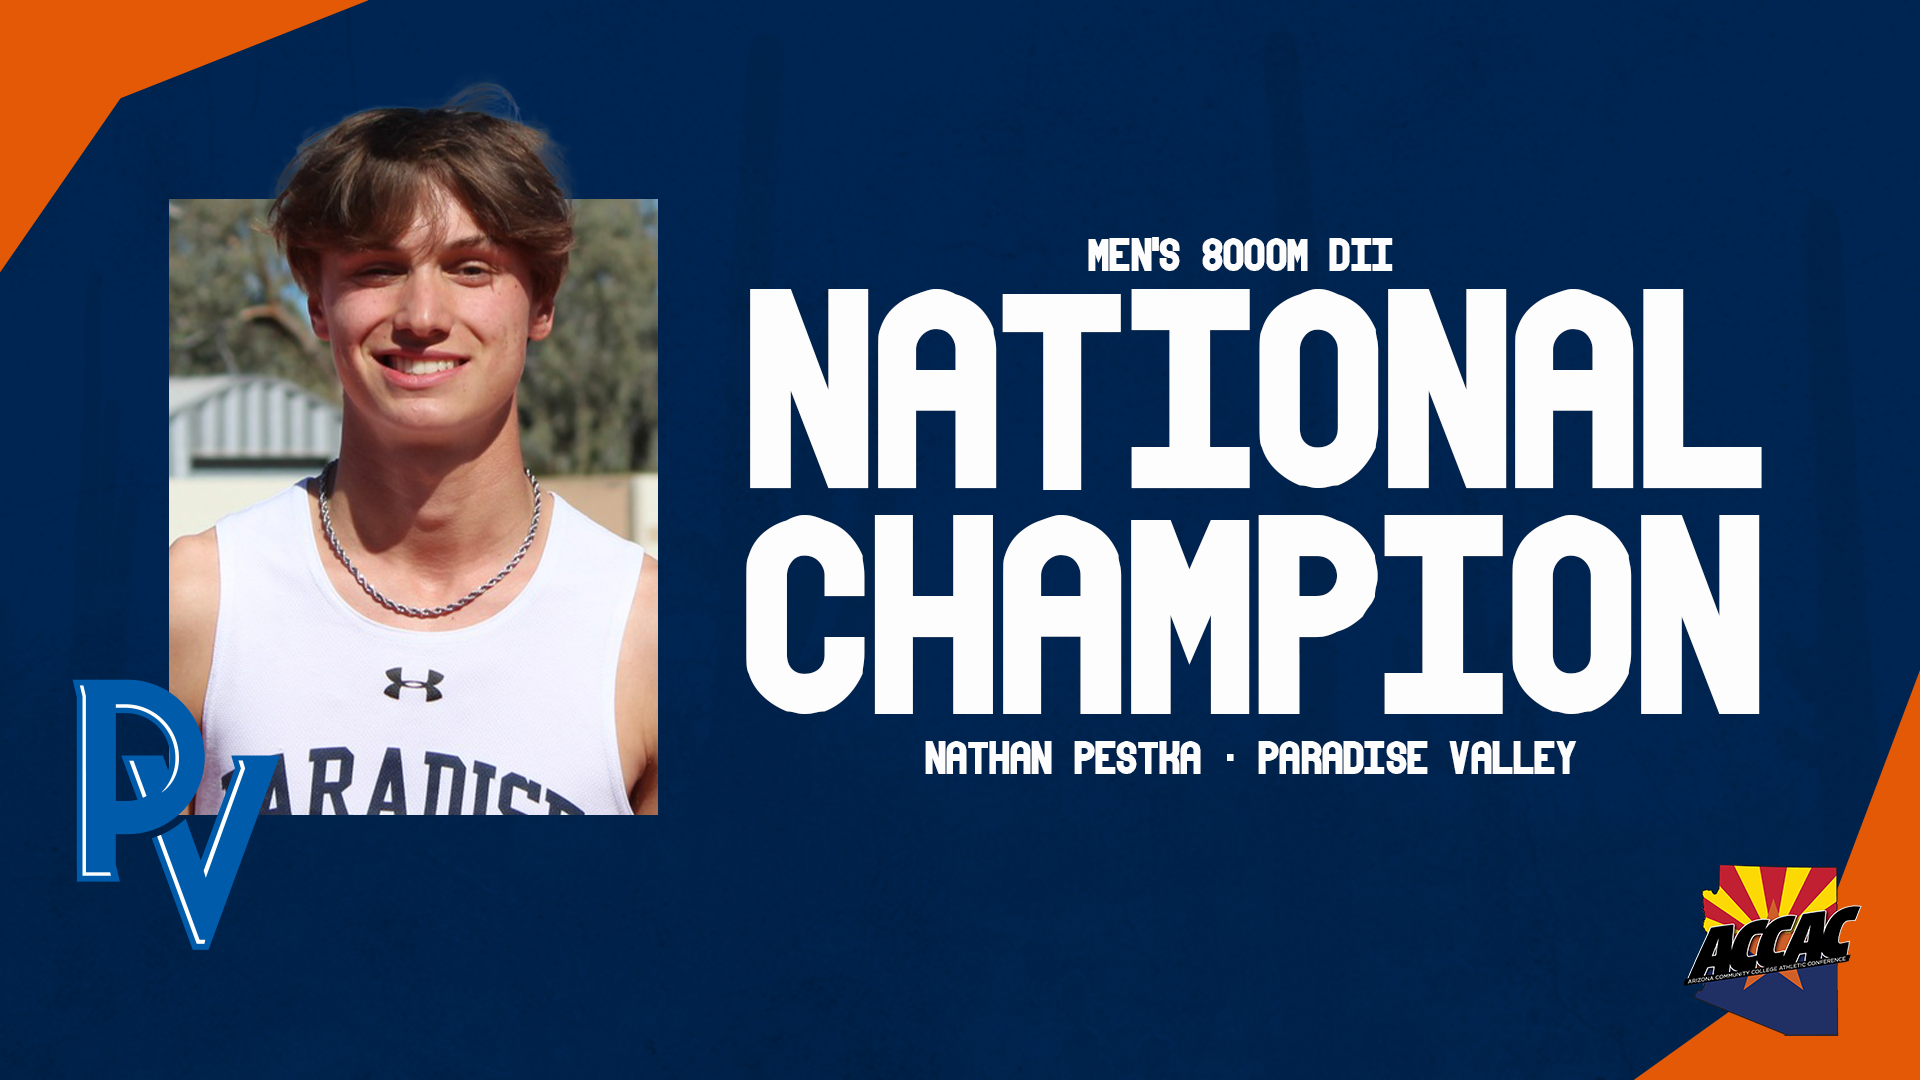 Paradise Valley's Pestka wins DII 8000m National Championship